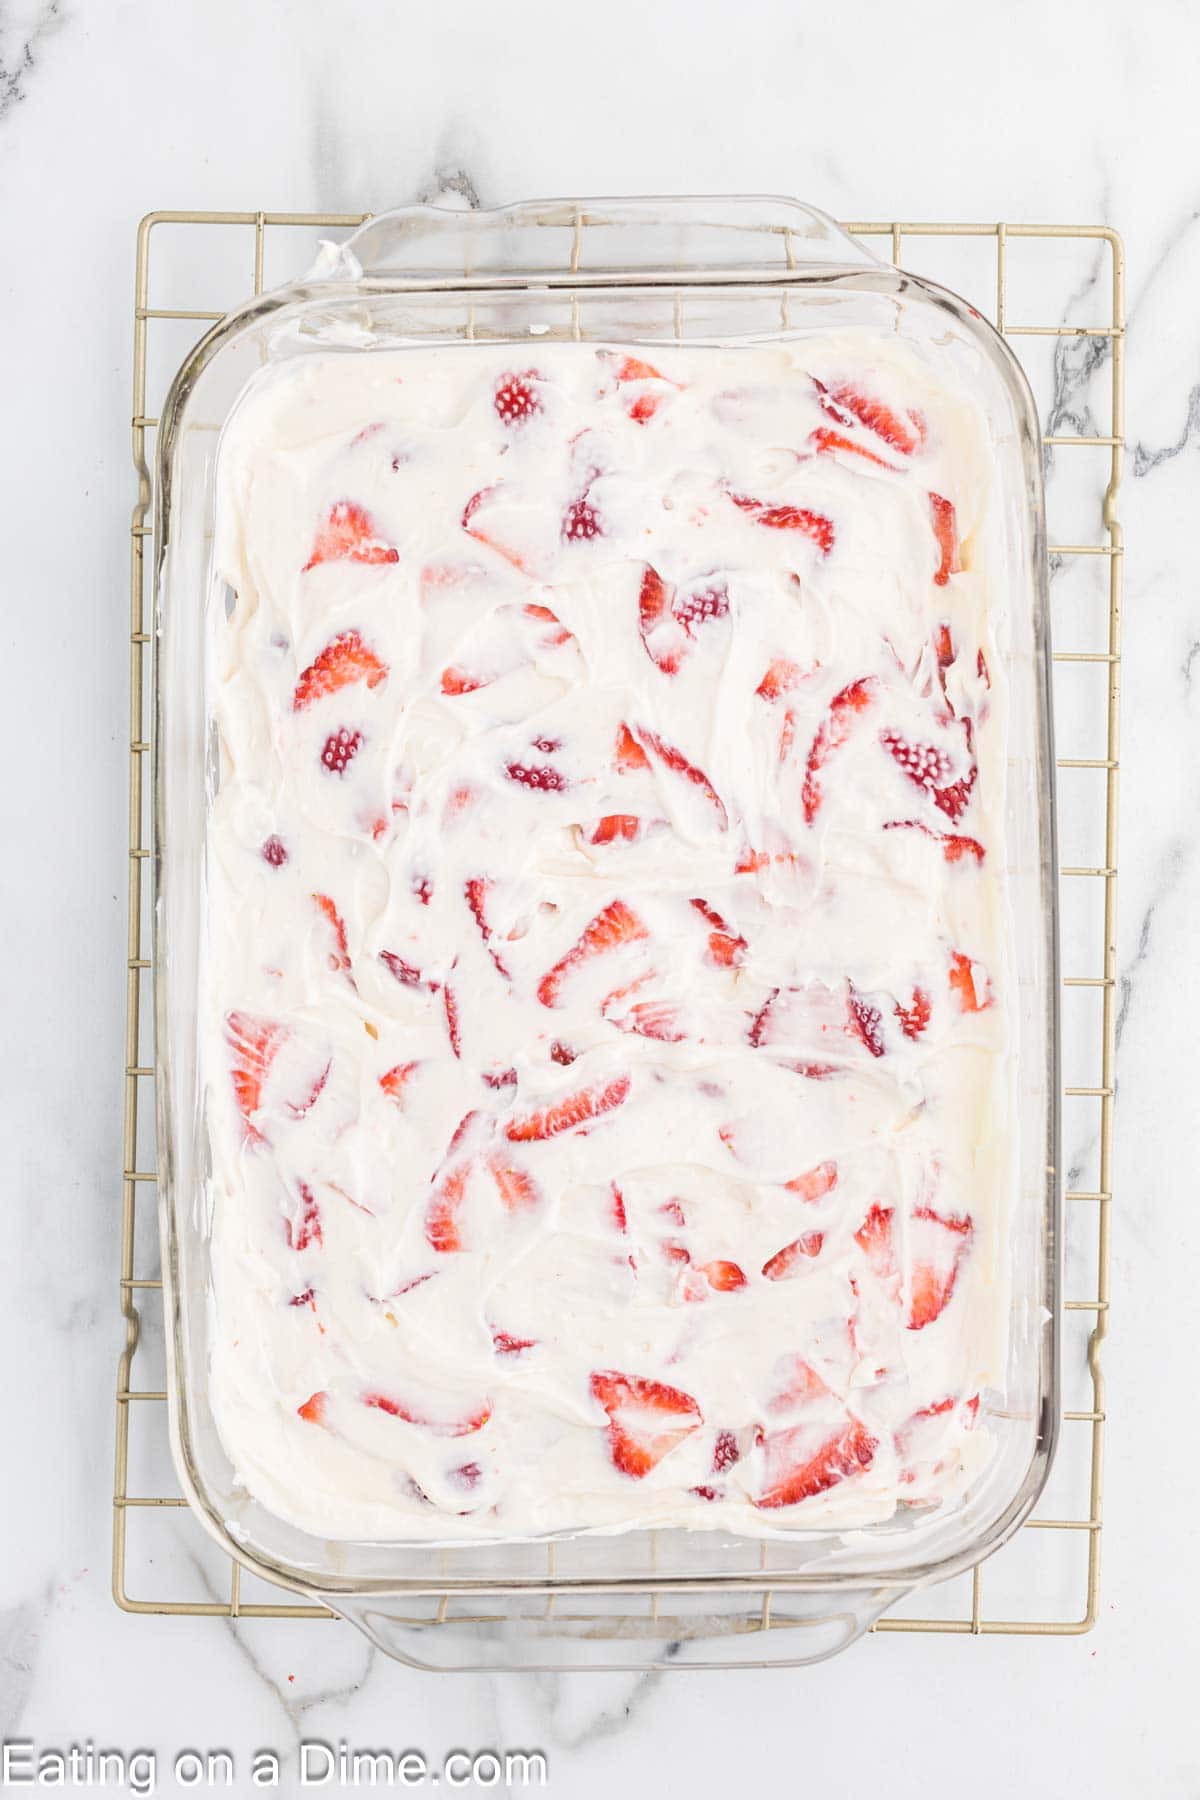 A glass baking dish filled with a white cream mixture topped with slices of fresh strawberries, placed on a cooling rack against a marble background. The cream layer covers most of the strawberries, leaving some partially visible, reminiscent of a delightful strawberry crunch bars recipe.